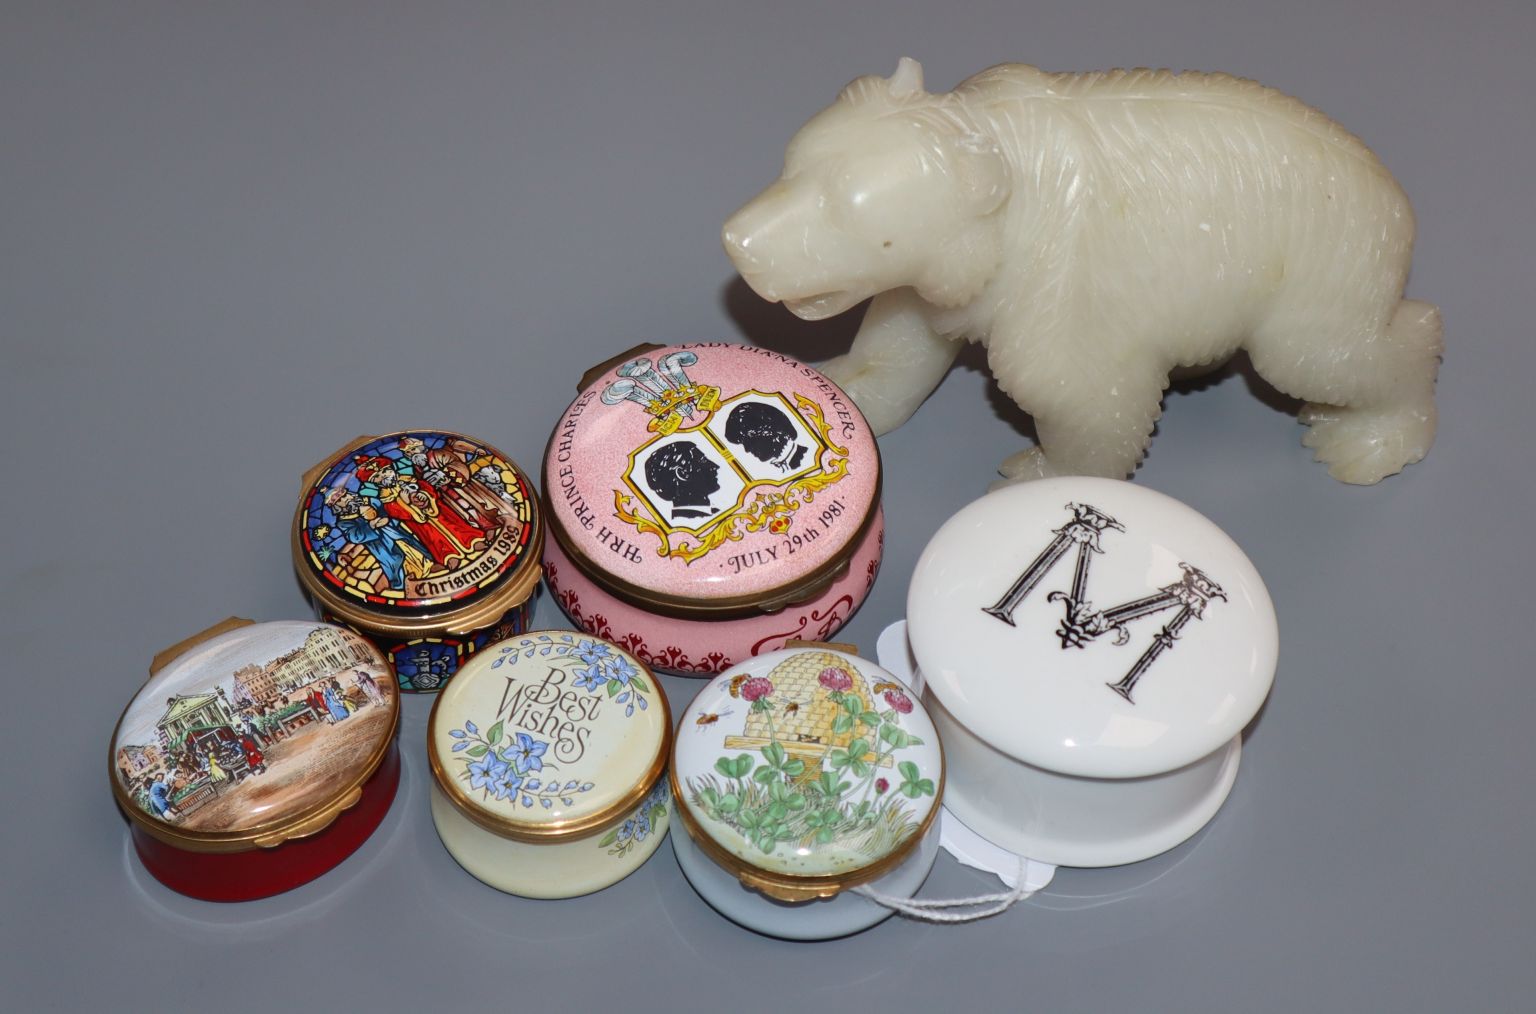 A collection of enamel pill boxes and a soapstone carved bear